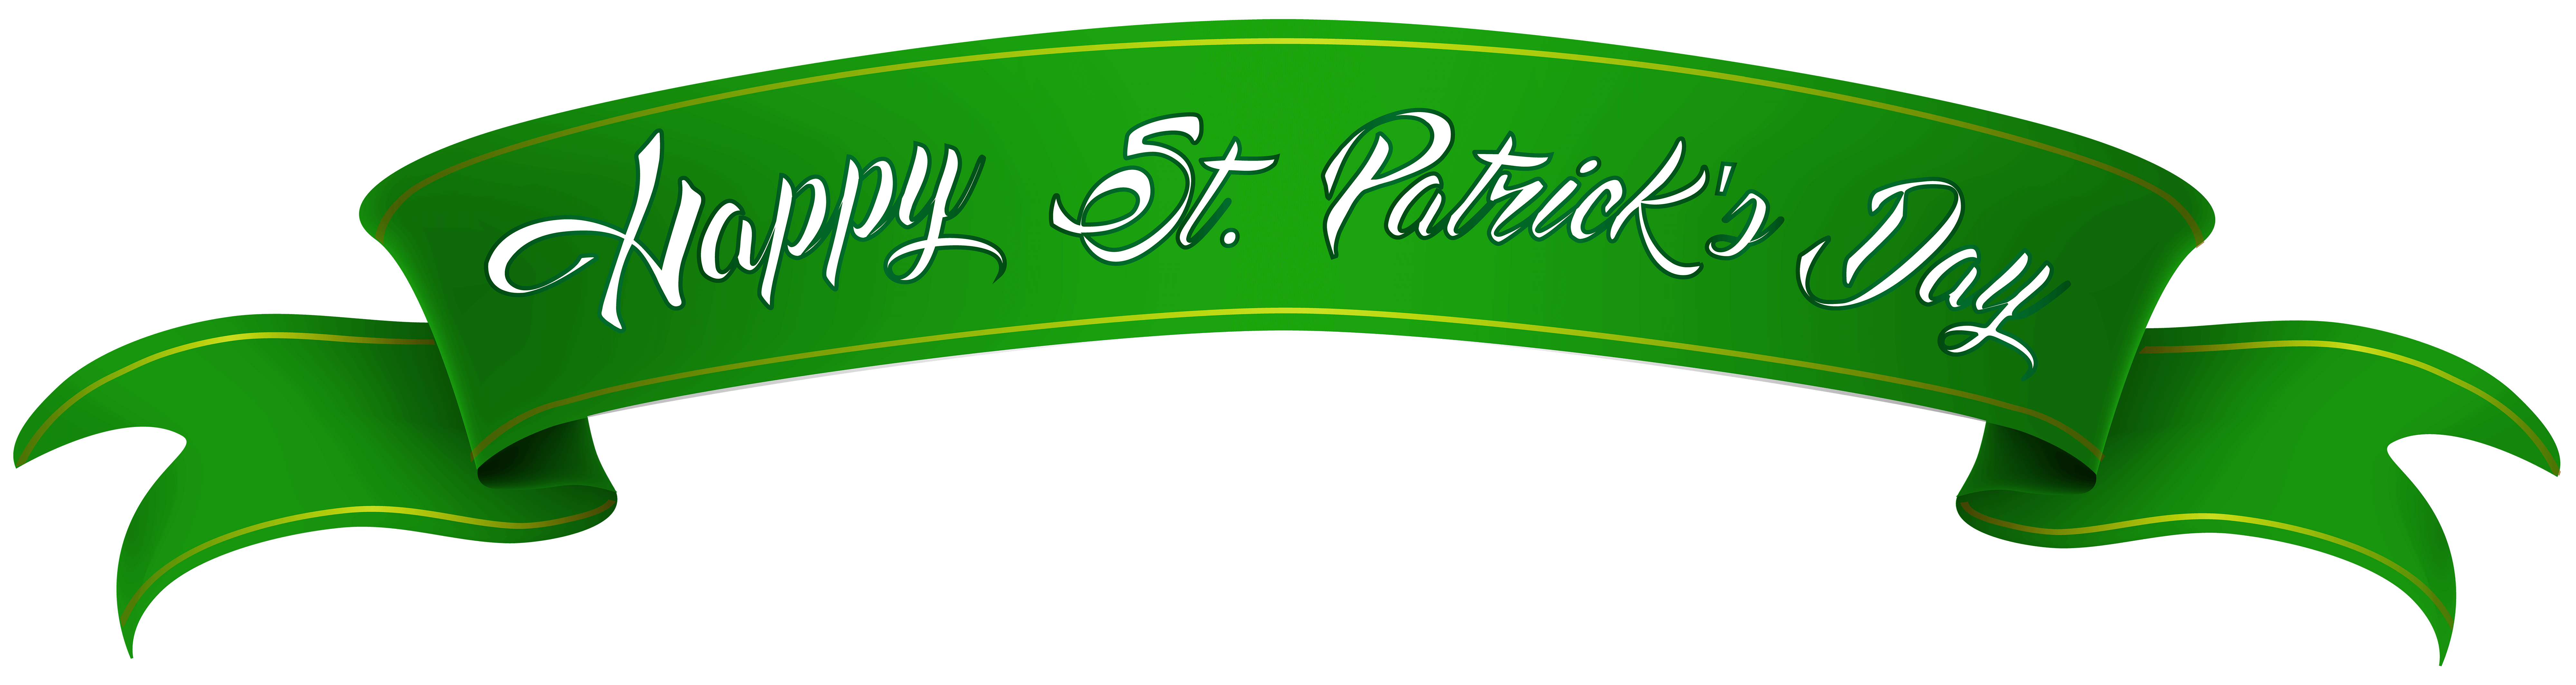 Happy St Patrick S Day Banner Clip Art Saint patrick day png ...